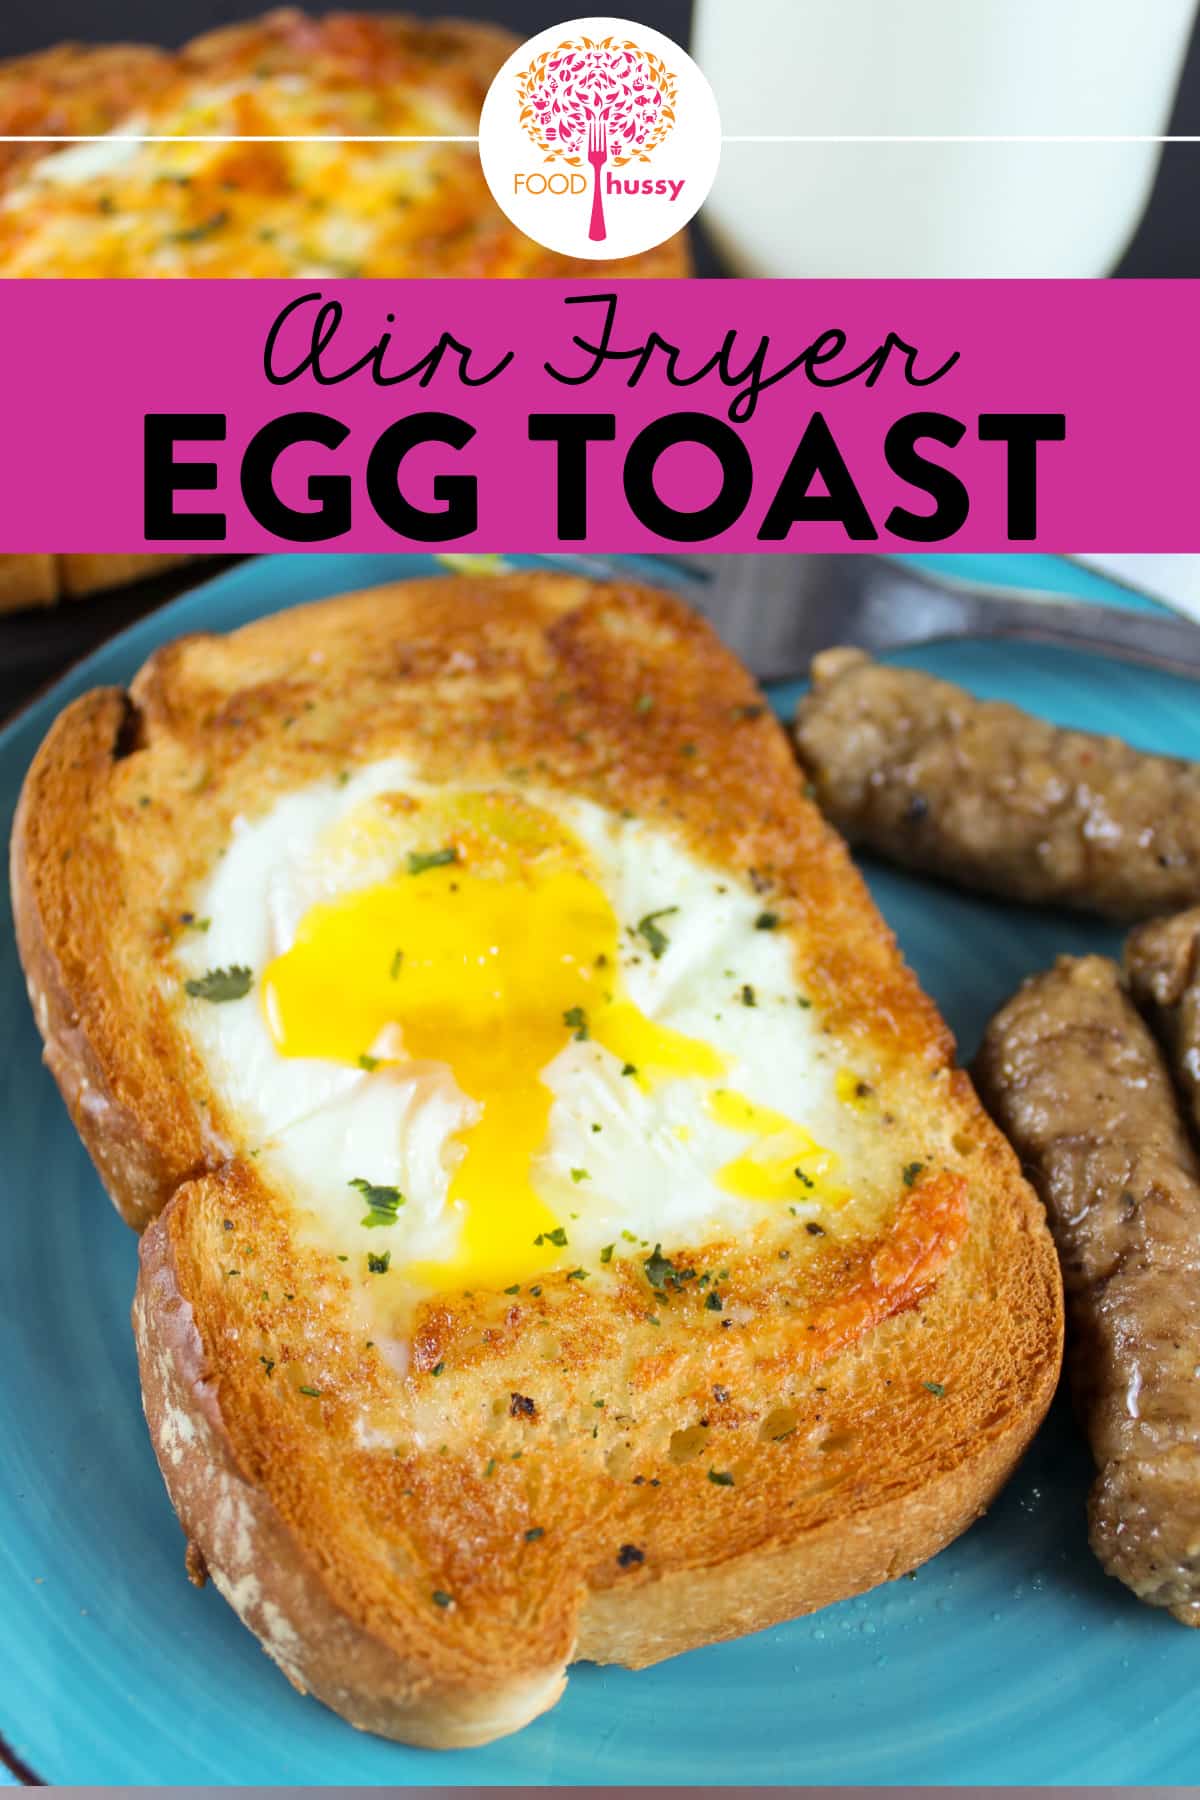 Air Fryer Egg Toast is a quick and delicious air fryer breakfast! It's perfect for those busy mornings when you've got a laundry list of things to do - just pop in the air fryer and keep going! via @foodhussy